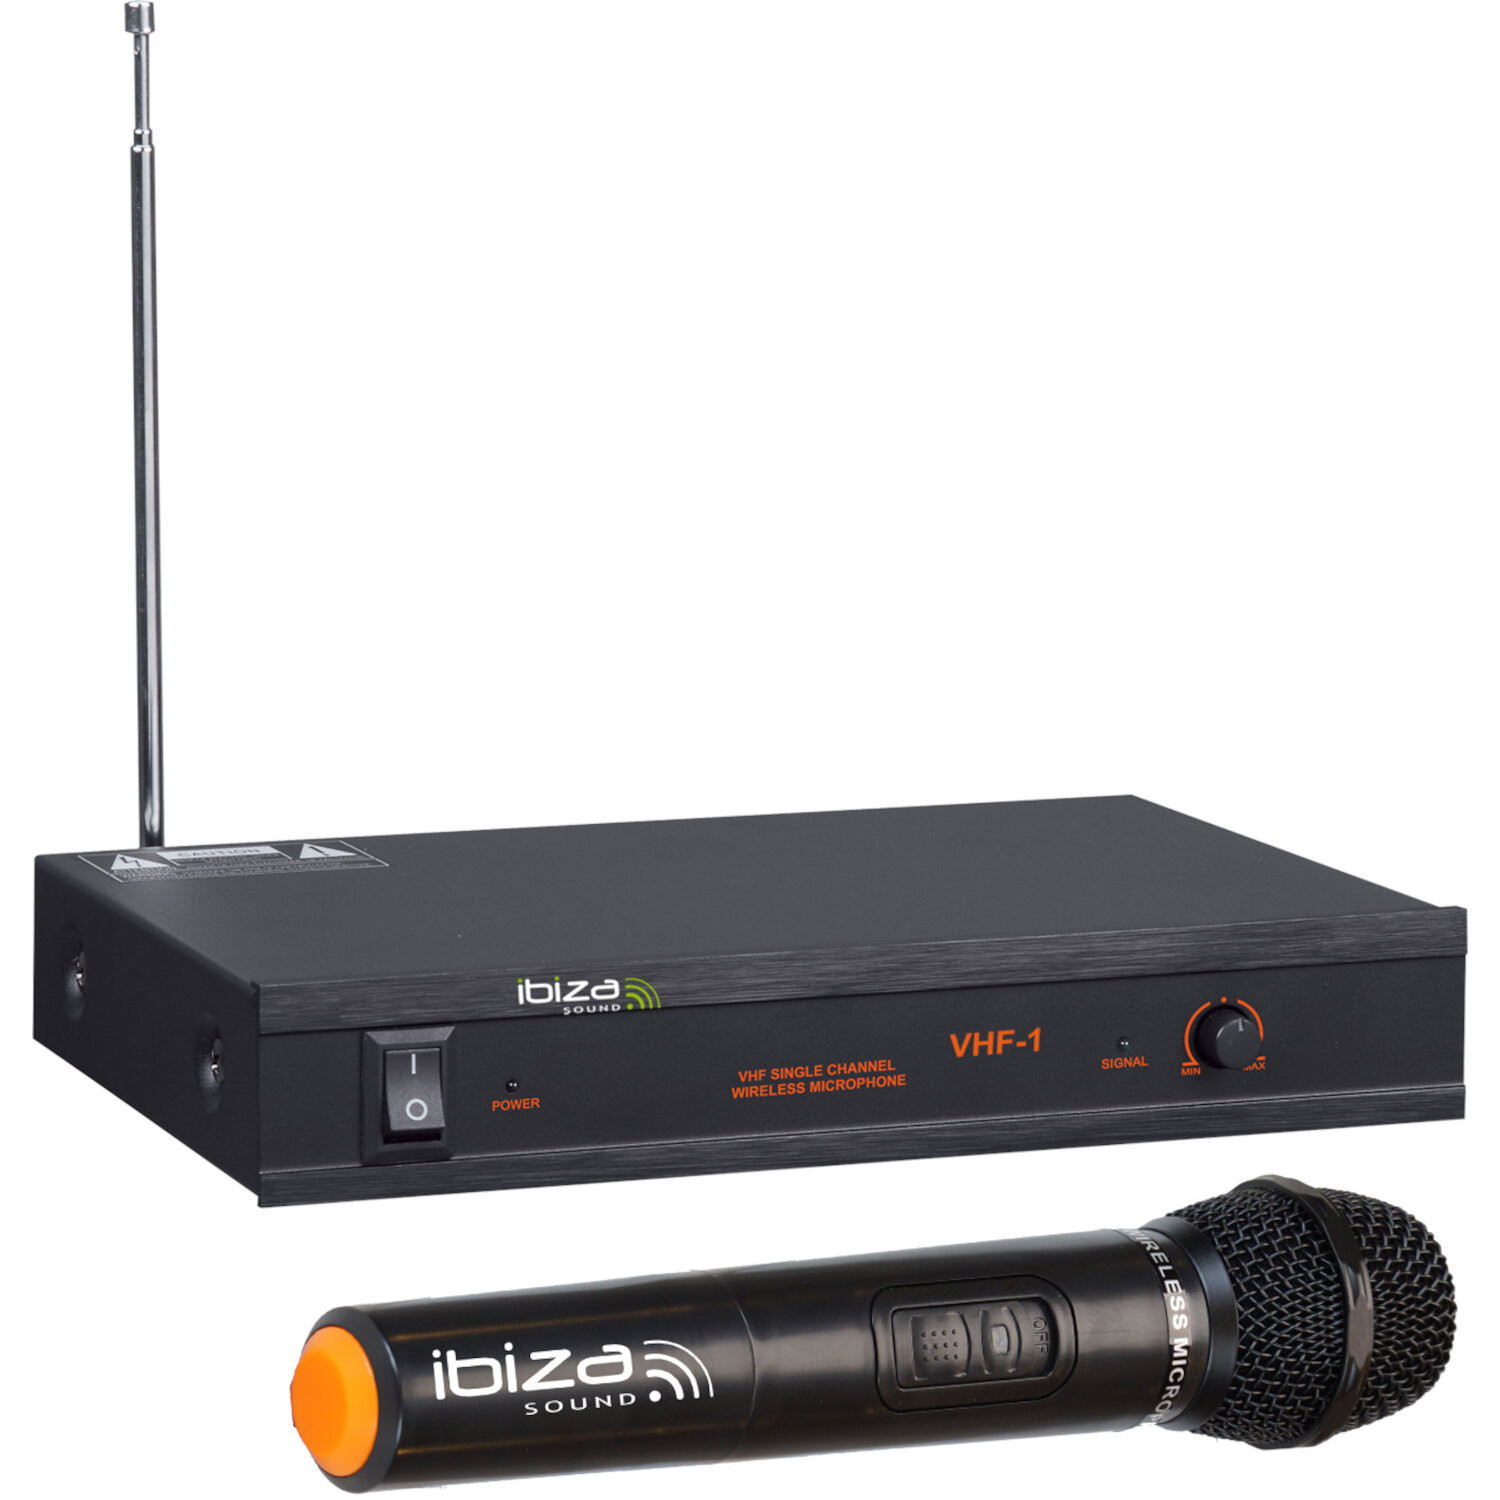 SYSTEME DE MICRO VHF A 2 CANAUX - LOTRONIC